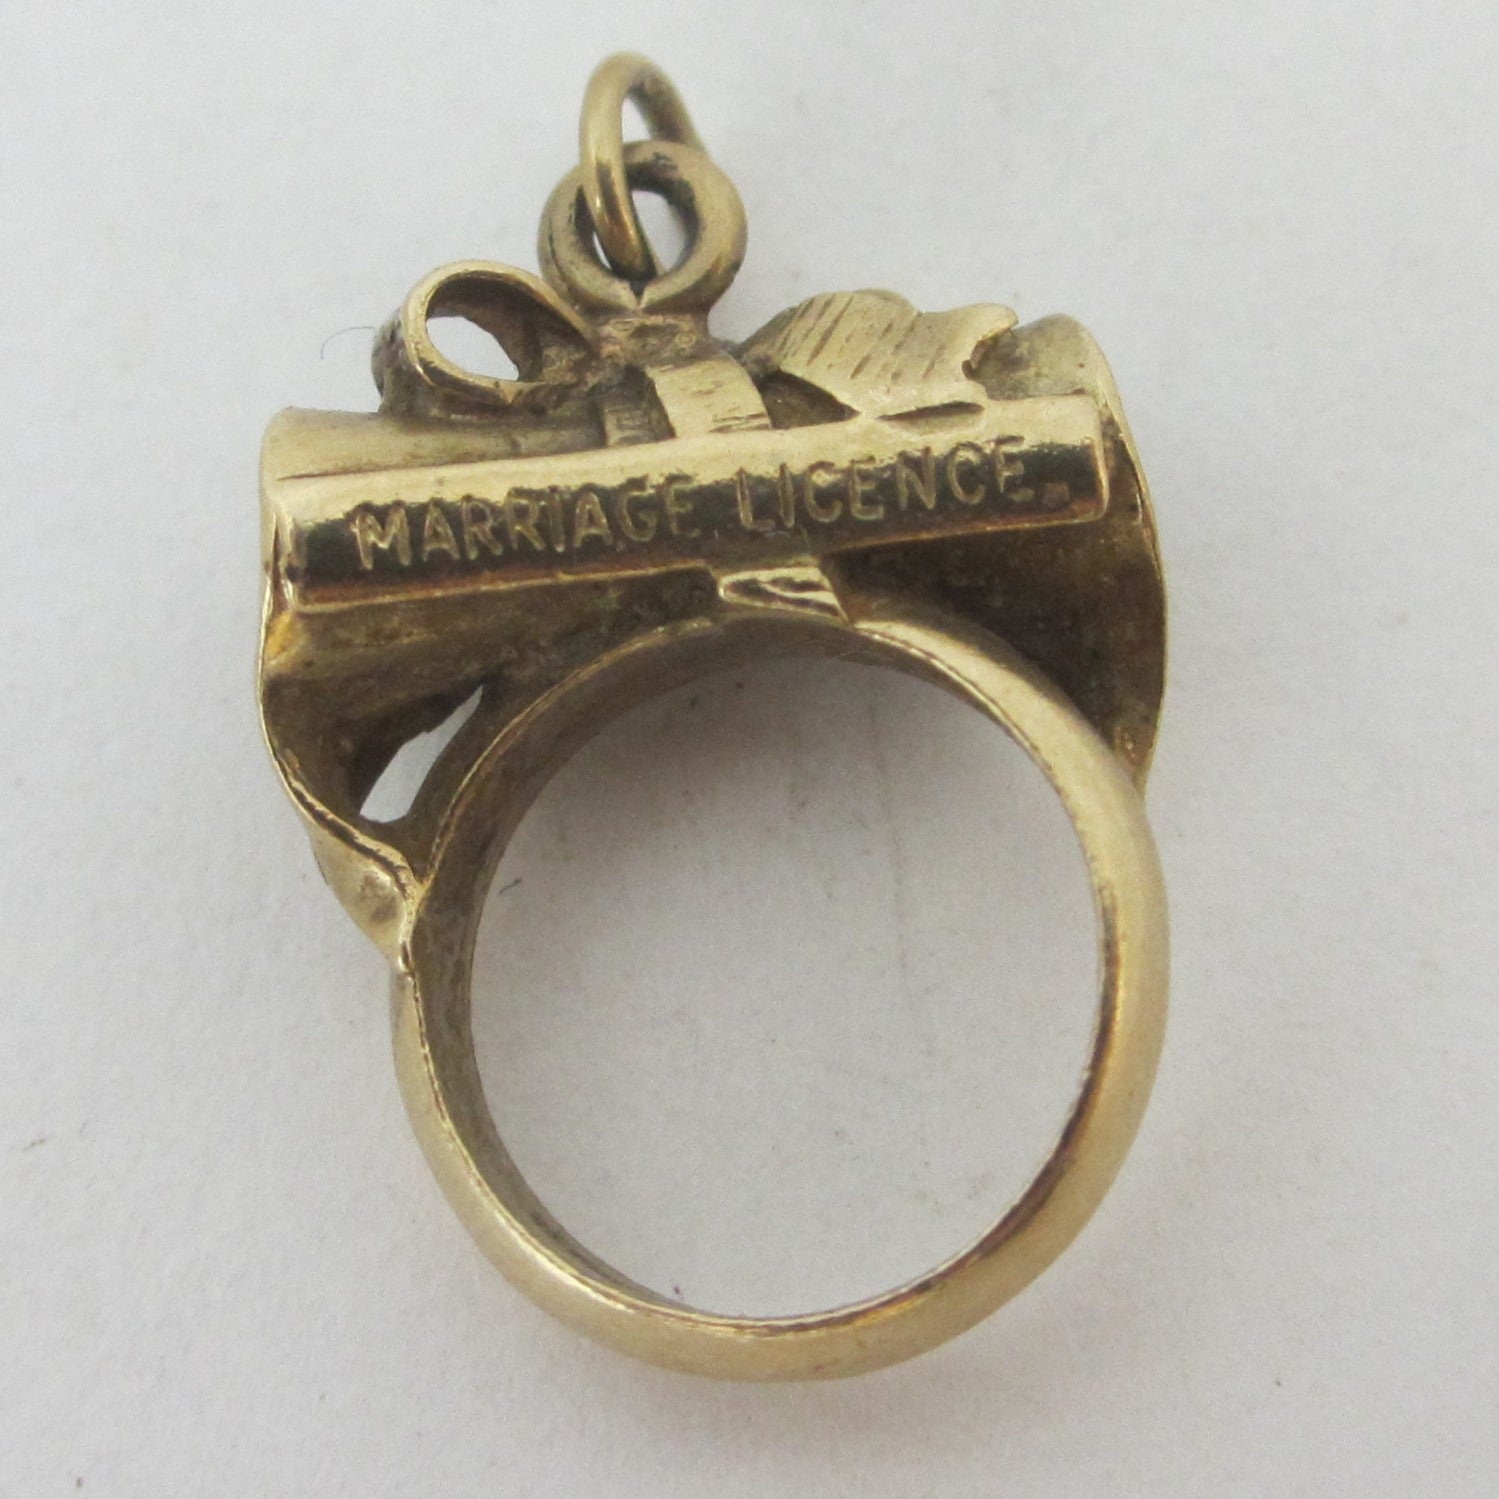 Marriage Licence 9k Gold Charm or Pendant with Stanhope Vintage 1965